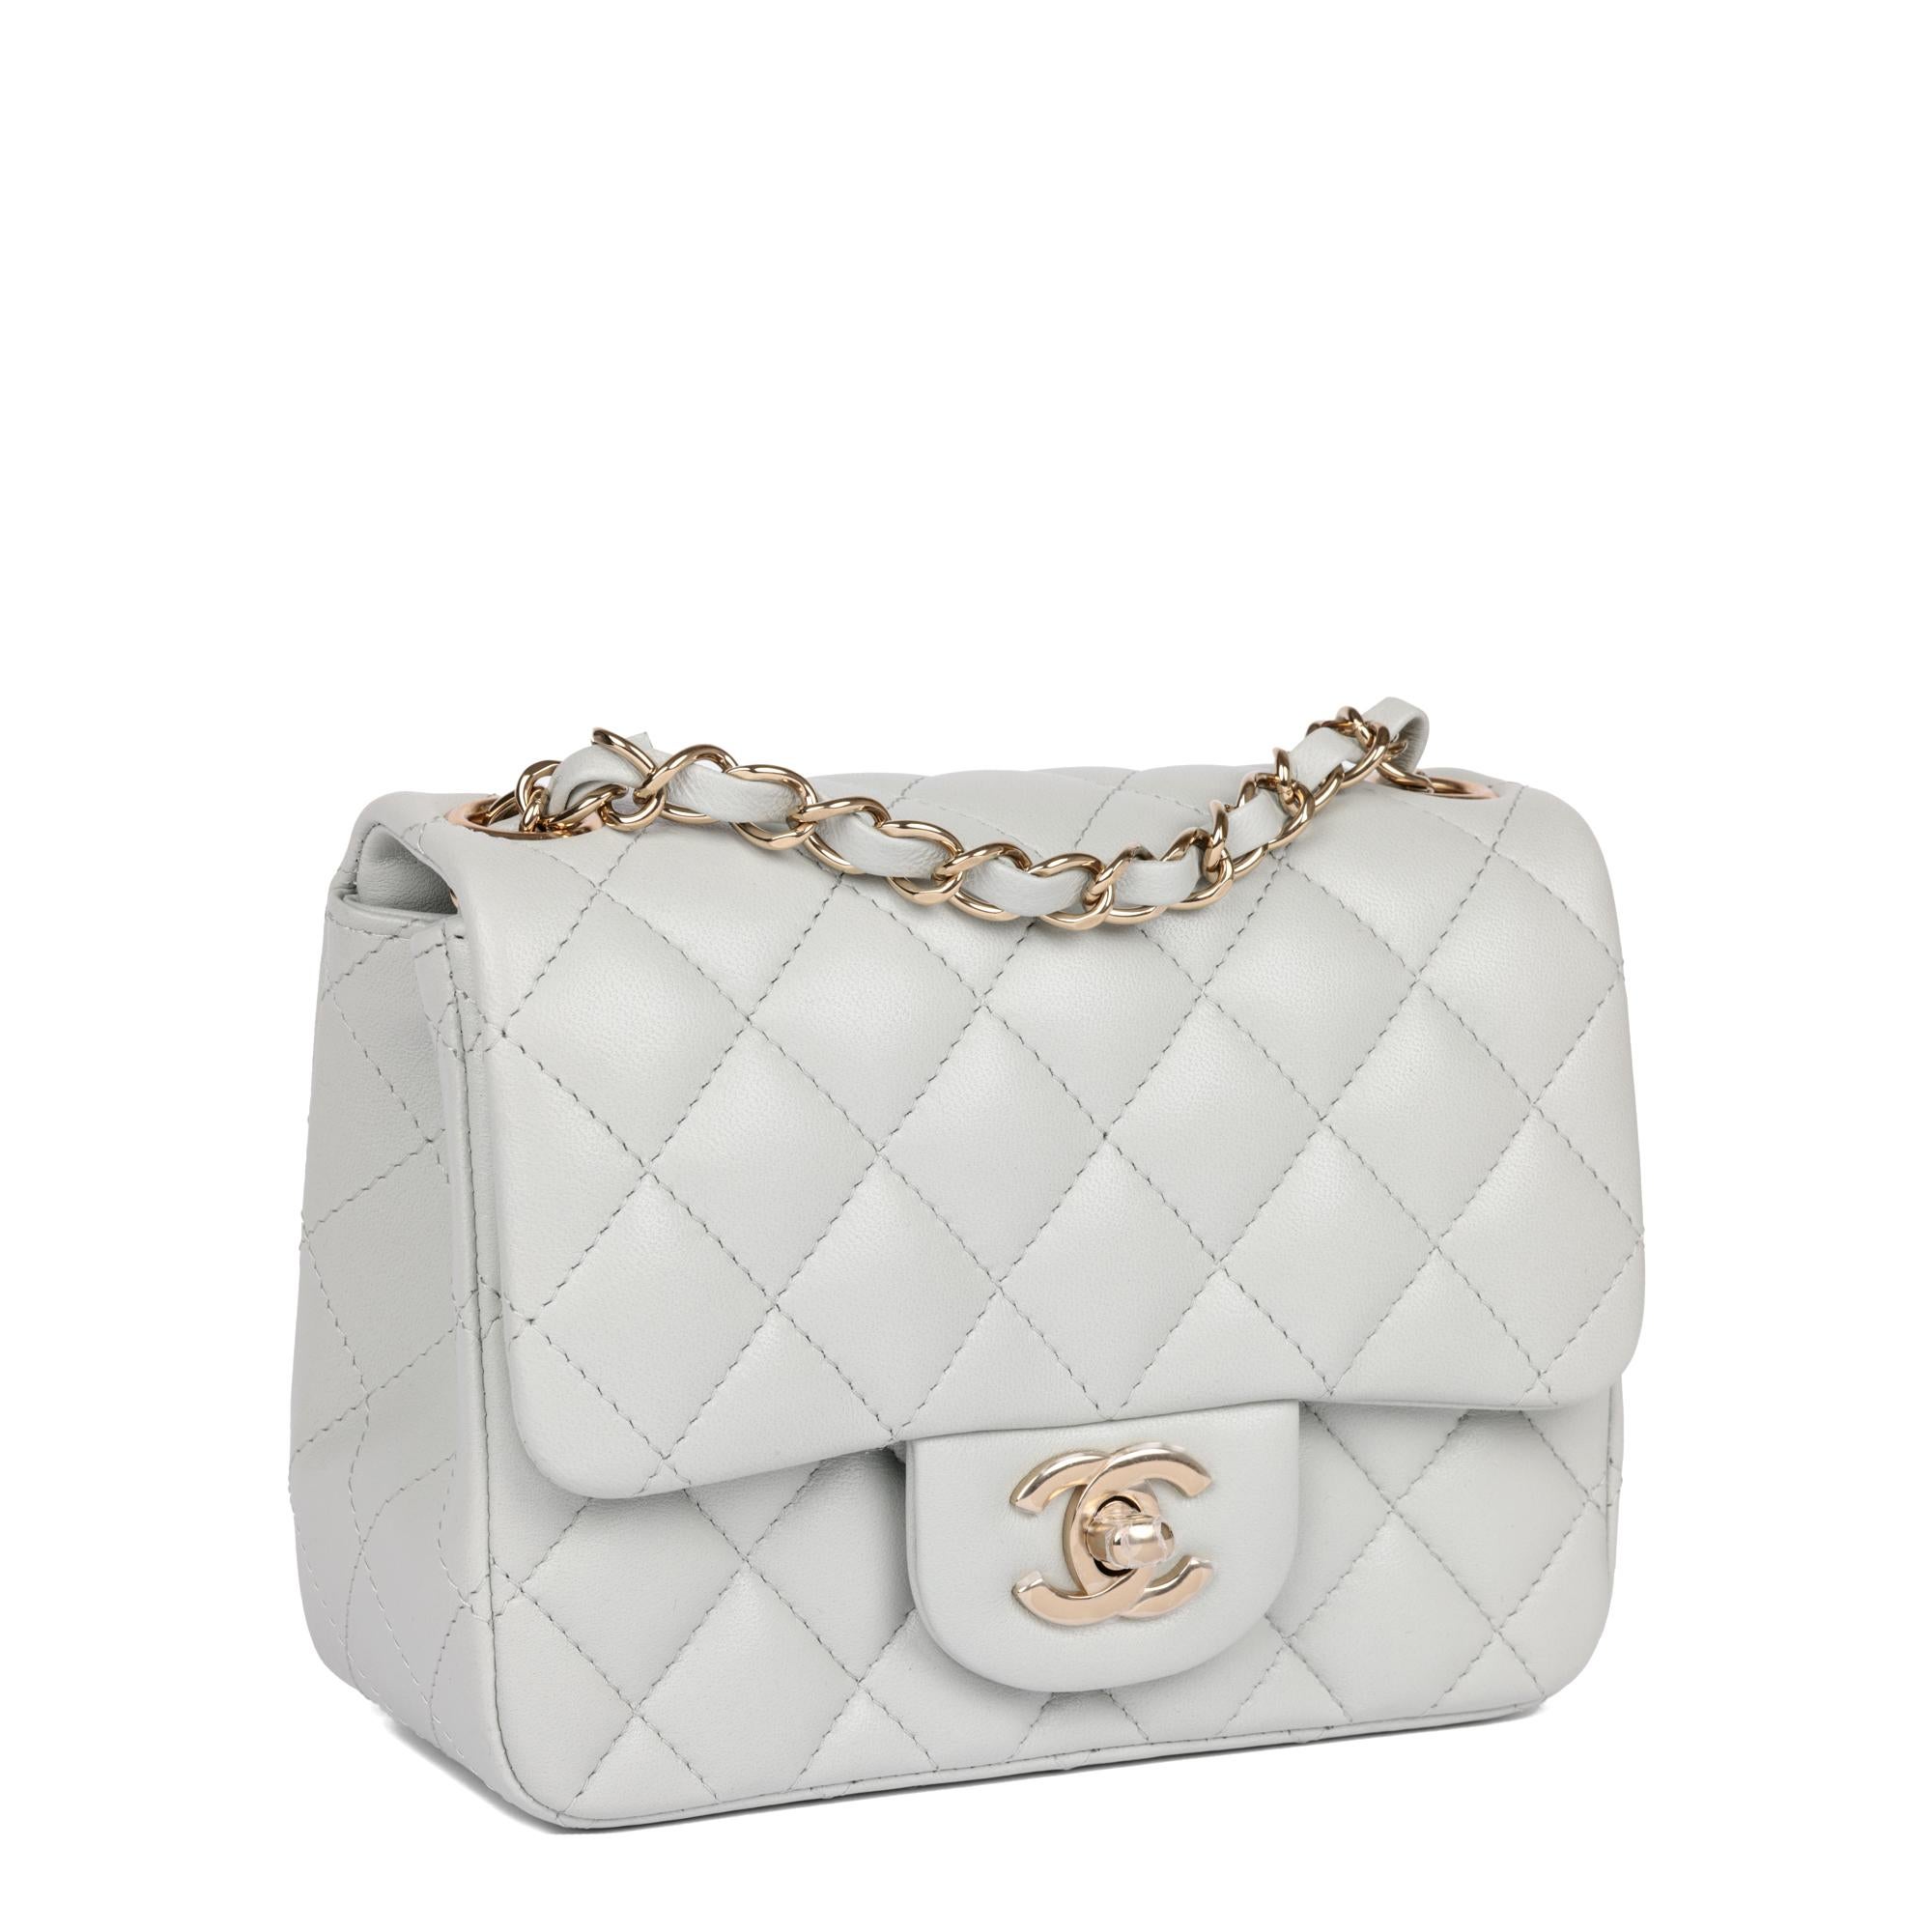 CHANEL
Light Grey Quilted Lambskin Square Mini Flap Bag

Xupes Reference: CB768
Serial Number: L71CTGK3
Age (Circa): 2022
Accompanied By: Chanel Dust Bag, Box, Care Booklet, Ribbon
Authenticity Details: Microchip (Made in Italy) 
Gender: